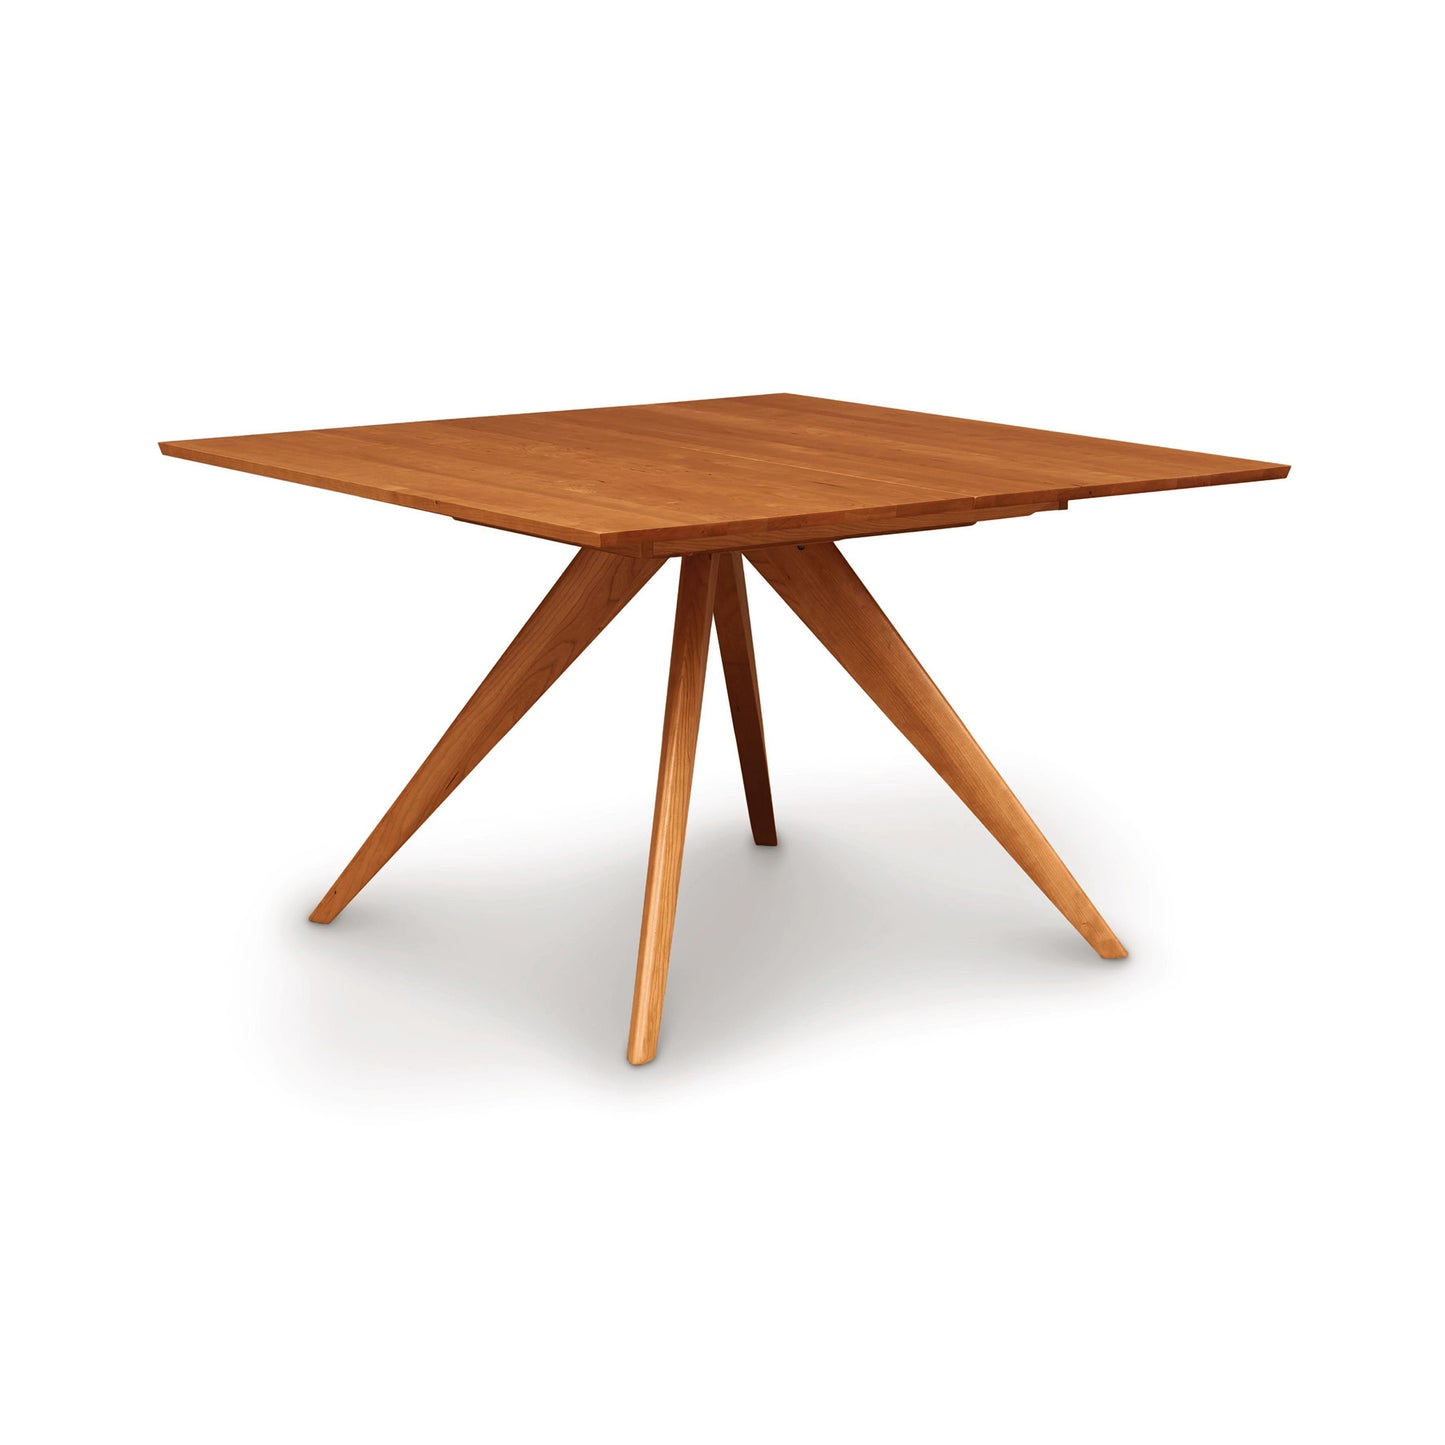 A Catalina Square Extension Dining Table by Copeland Furniture, made of sustainable hardwoods with a flat top and angular legs set on a white background.